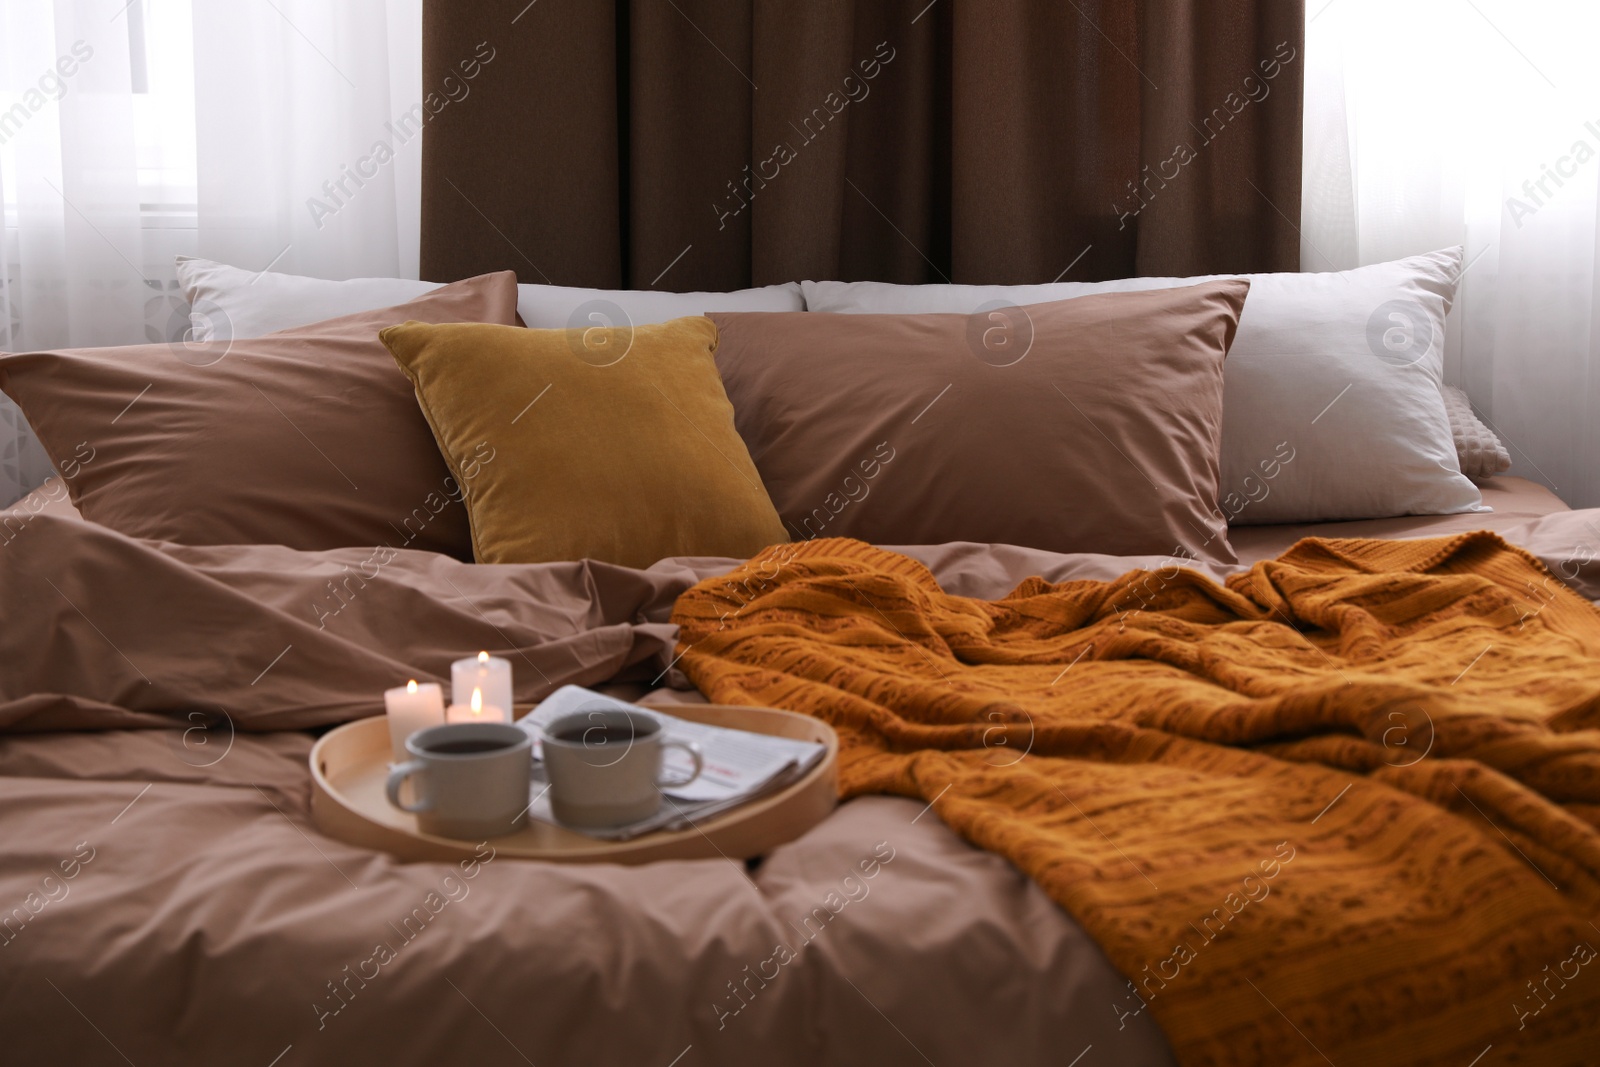 Photo of Cups of hot drink and candles on bed with brown linens in room